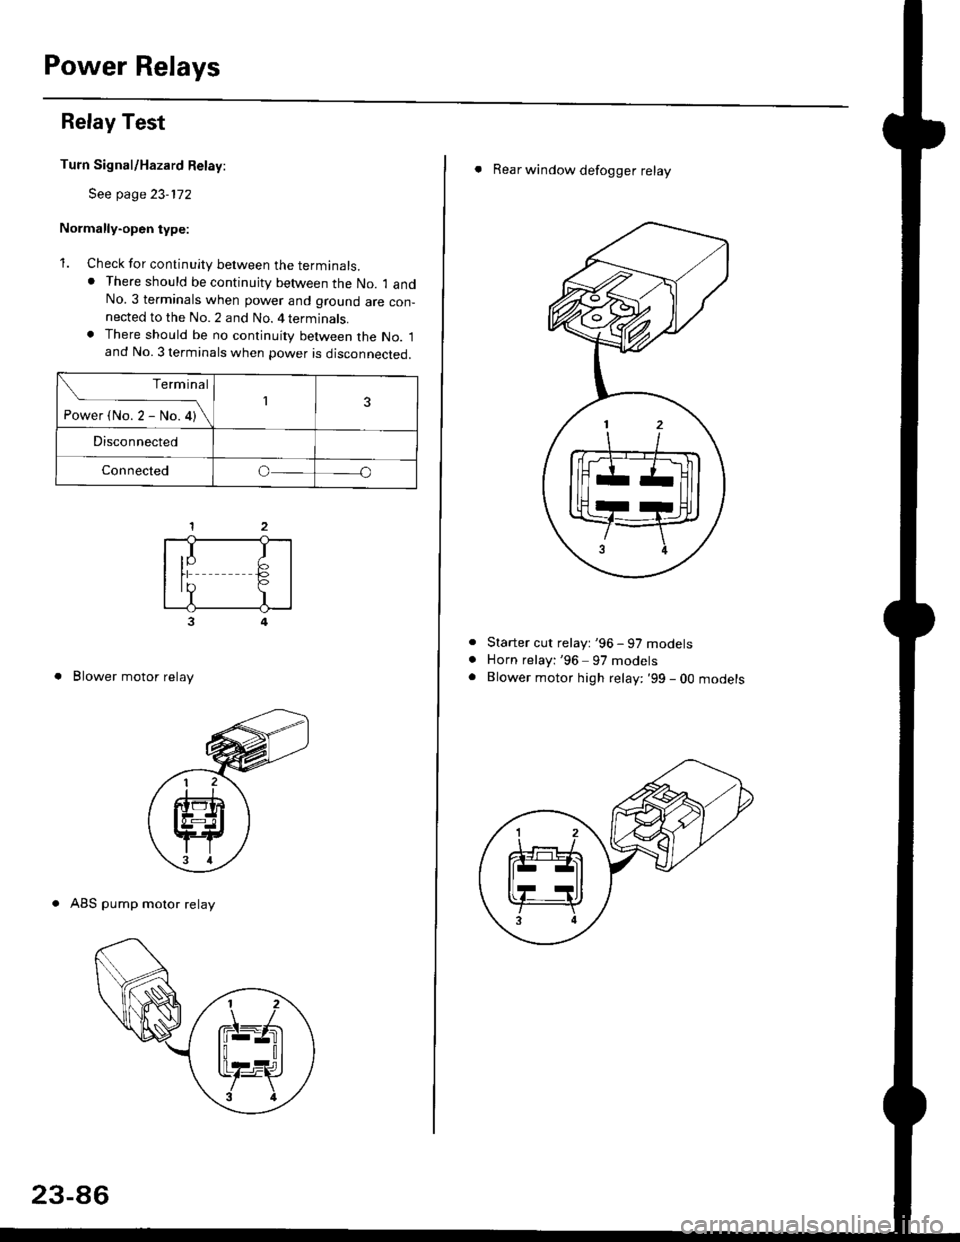 HONDA CIVIC 1998 6.G Workshop Manual Power Relays
Relay Test
Turn Signal/Hazard Relay:
See page 23-172
Normally-open type:
1. Check for continuity between the terminals.. There should be continujty between the No. 1 andNo.3 terminals whe